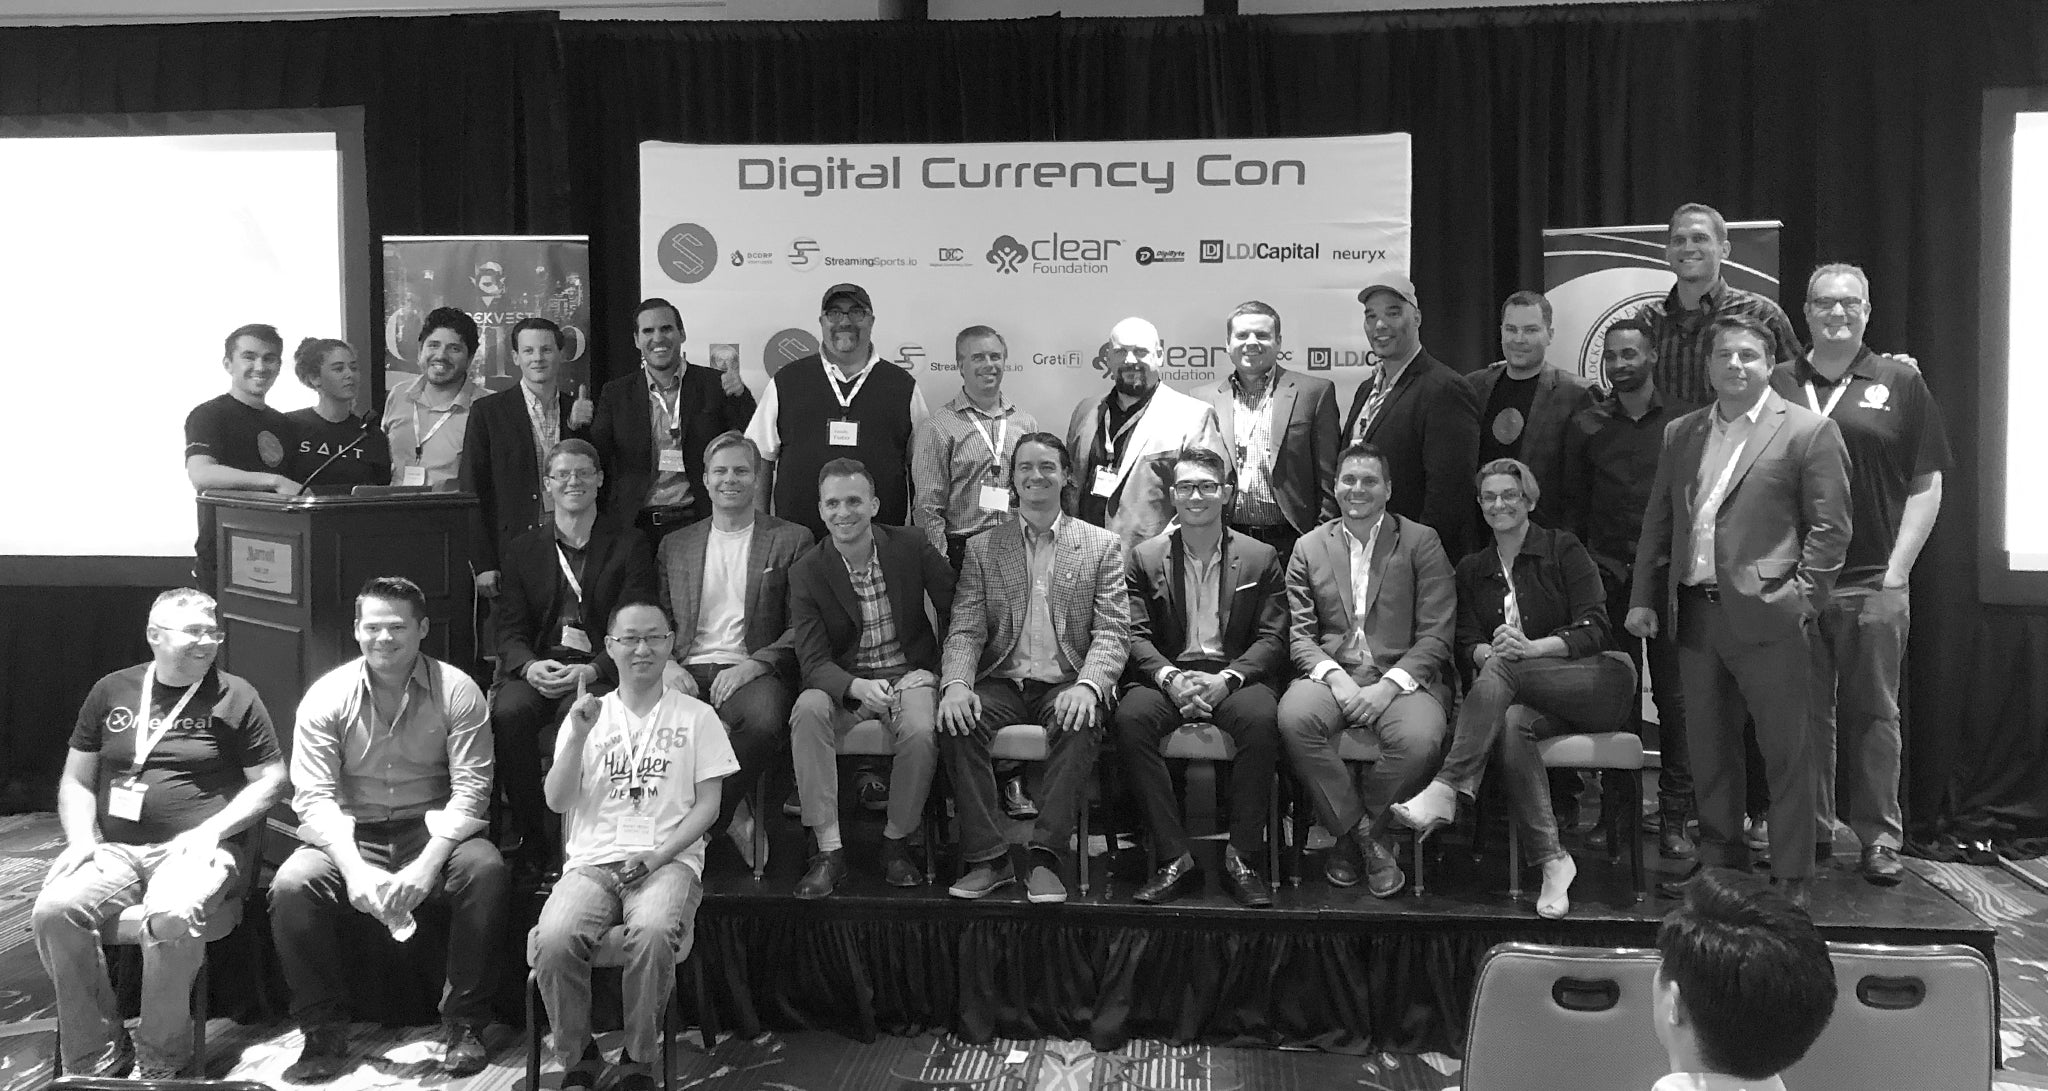 ClearFoundation Presentation at Digital Currency Con 2018 Park City